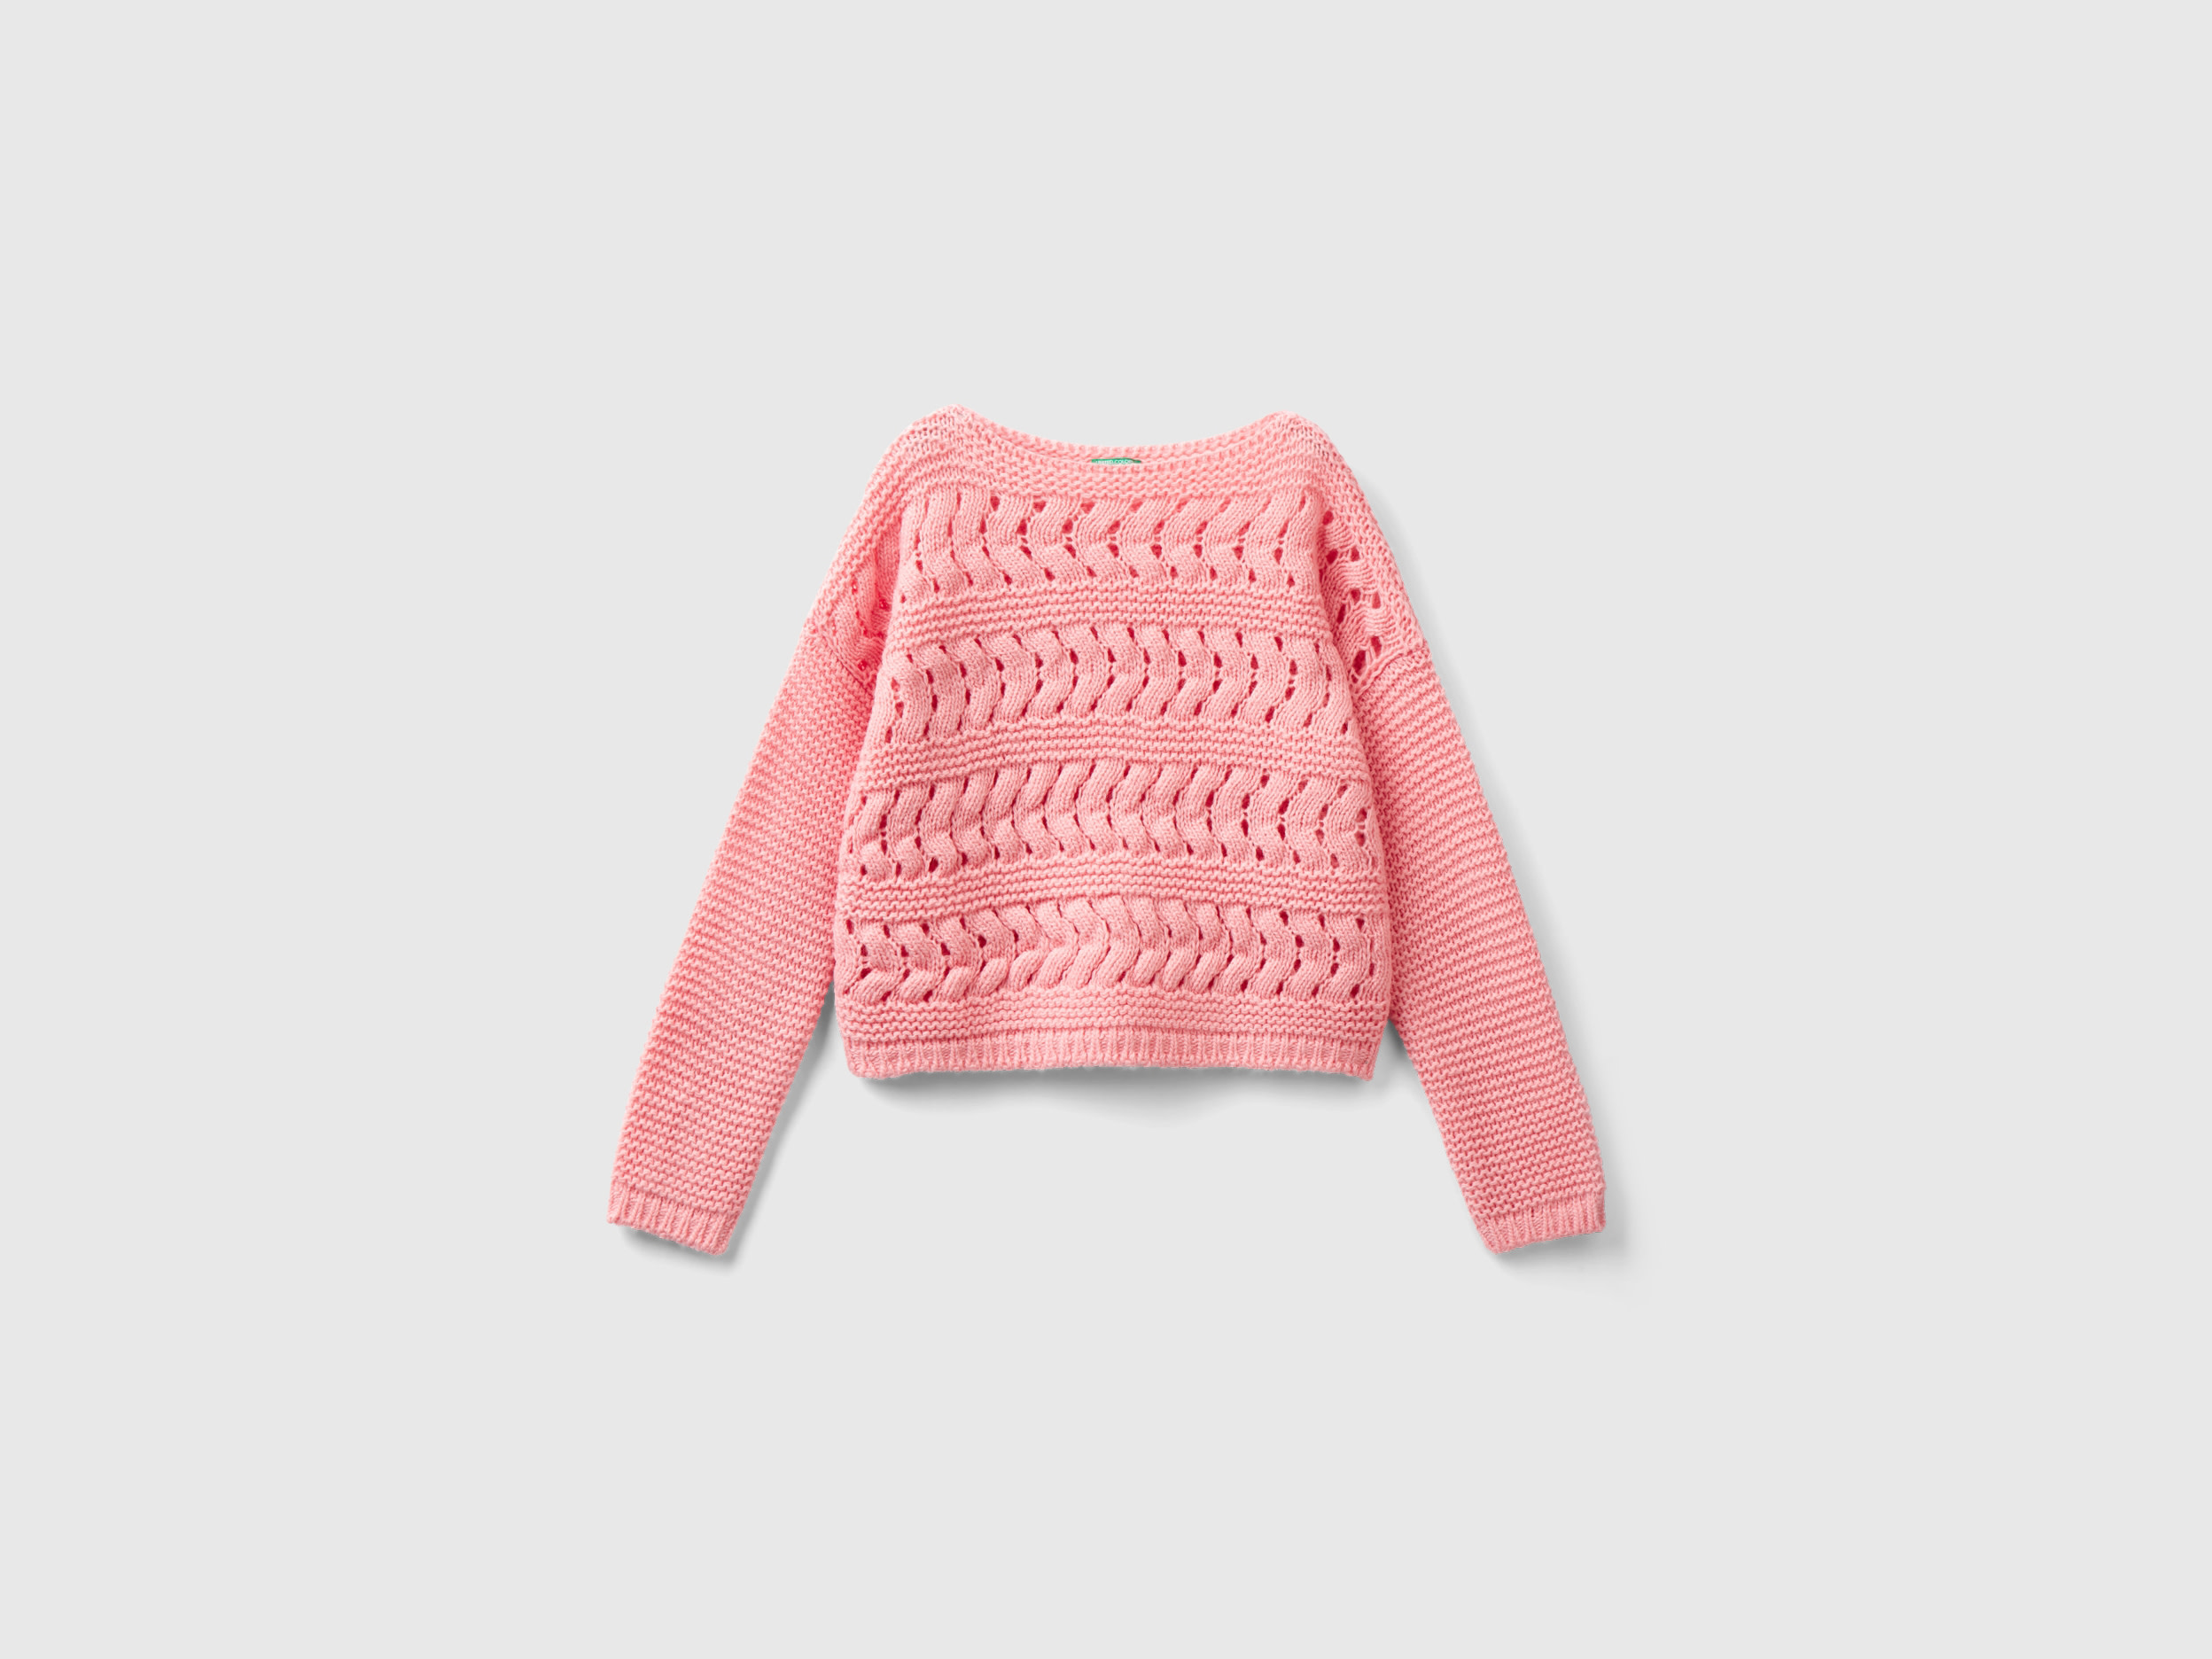 Benetton, Cable Knit Sweater In Wool Blend, size 2XL, Pink, Kids